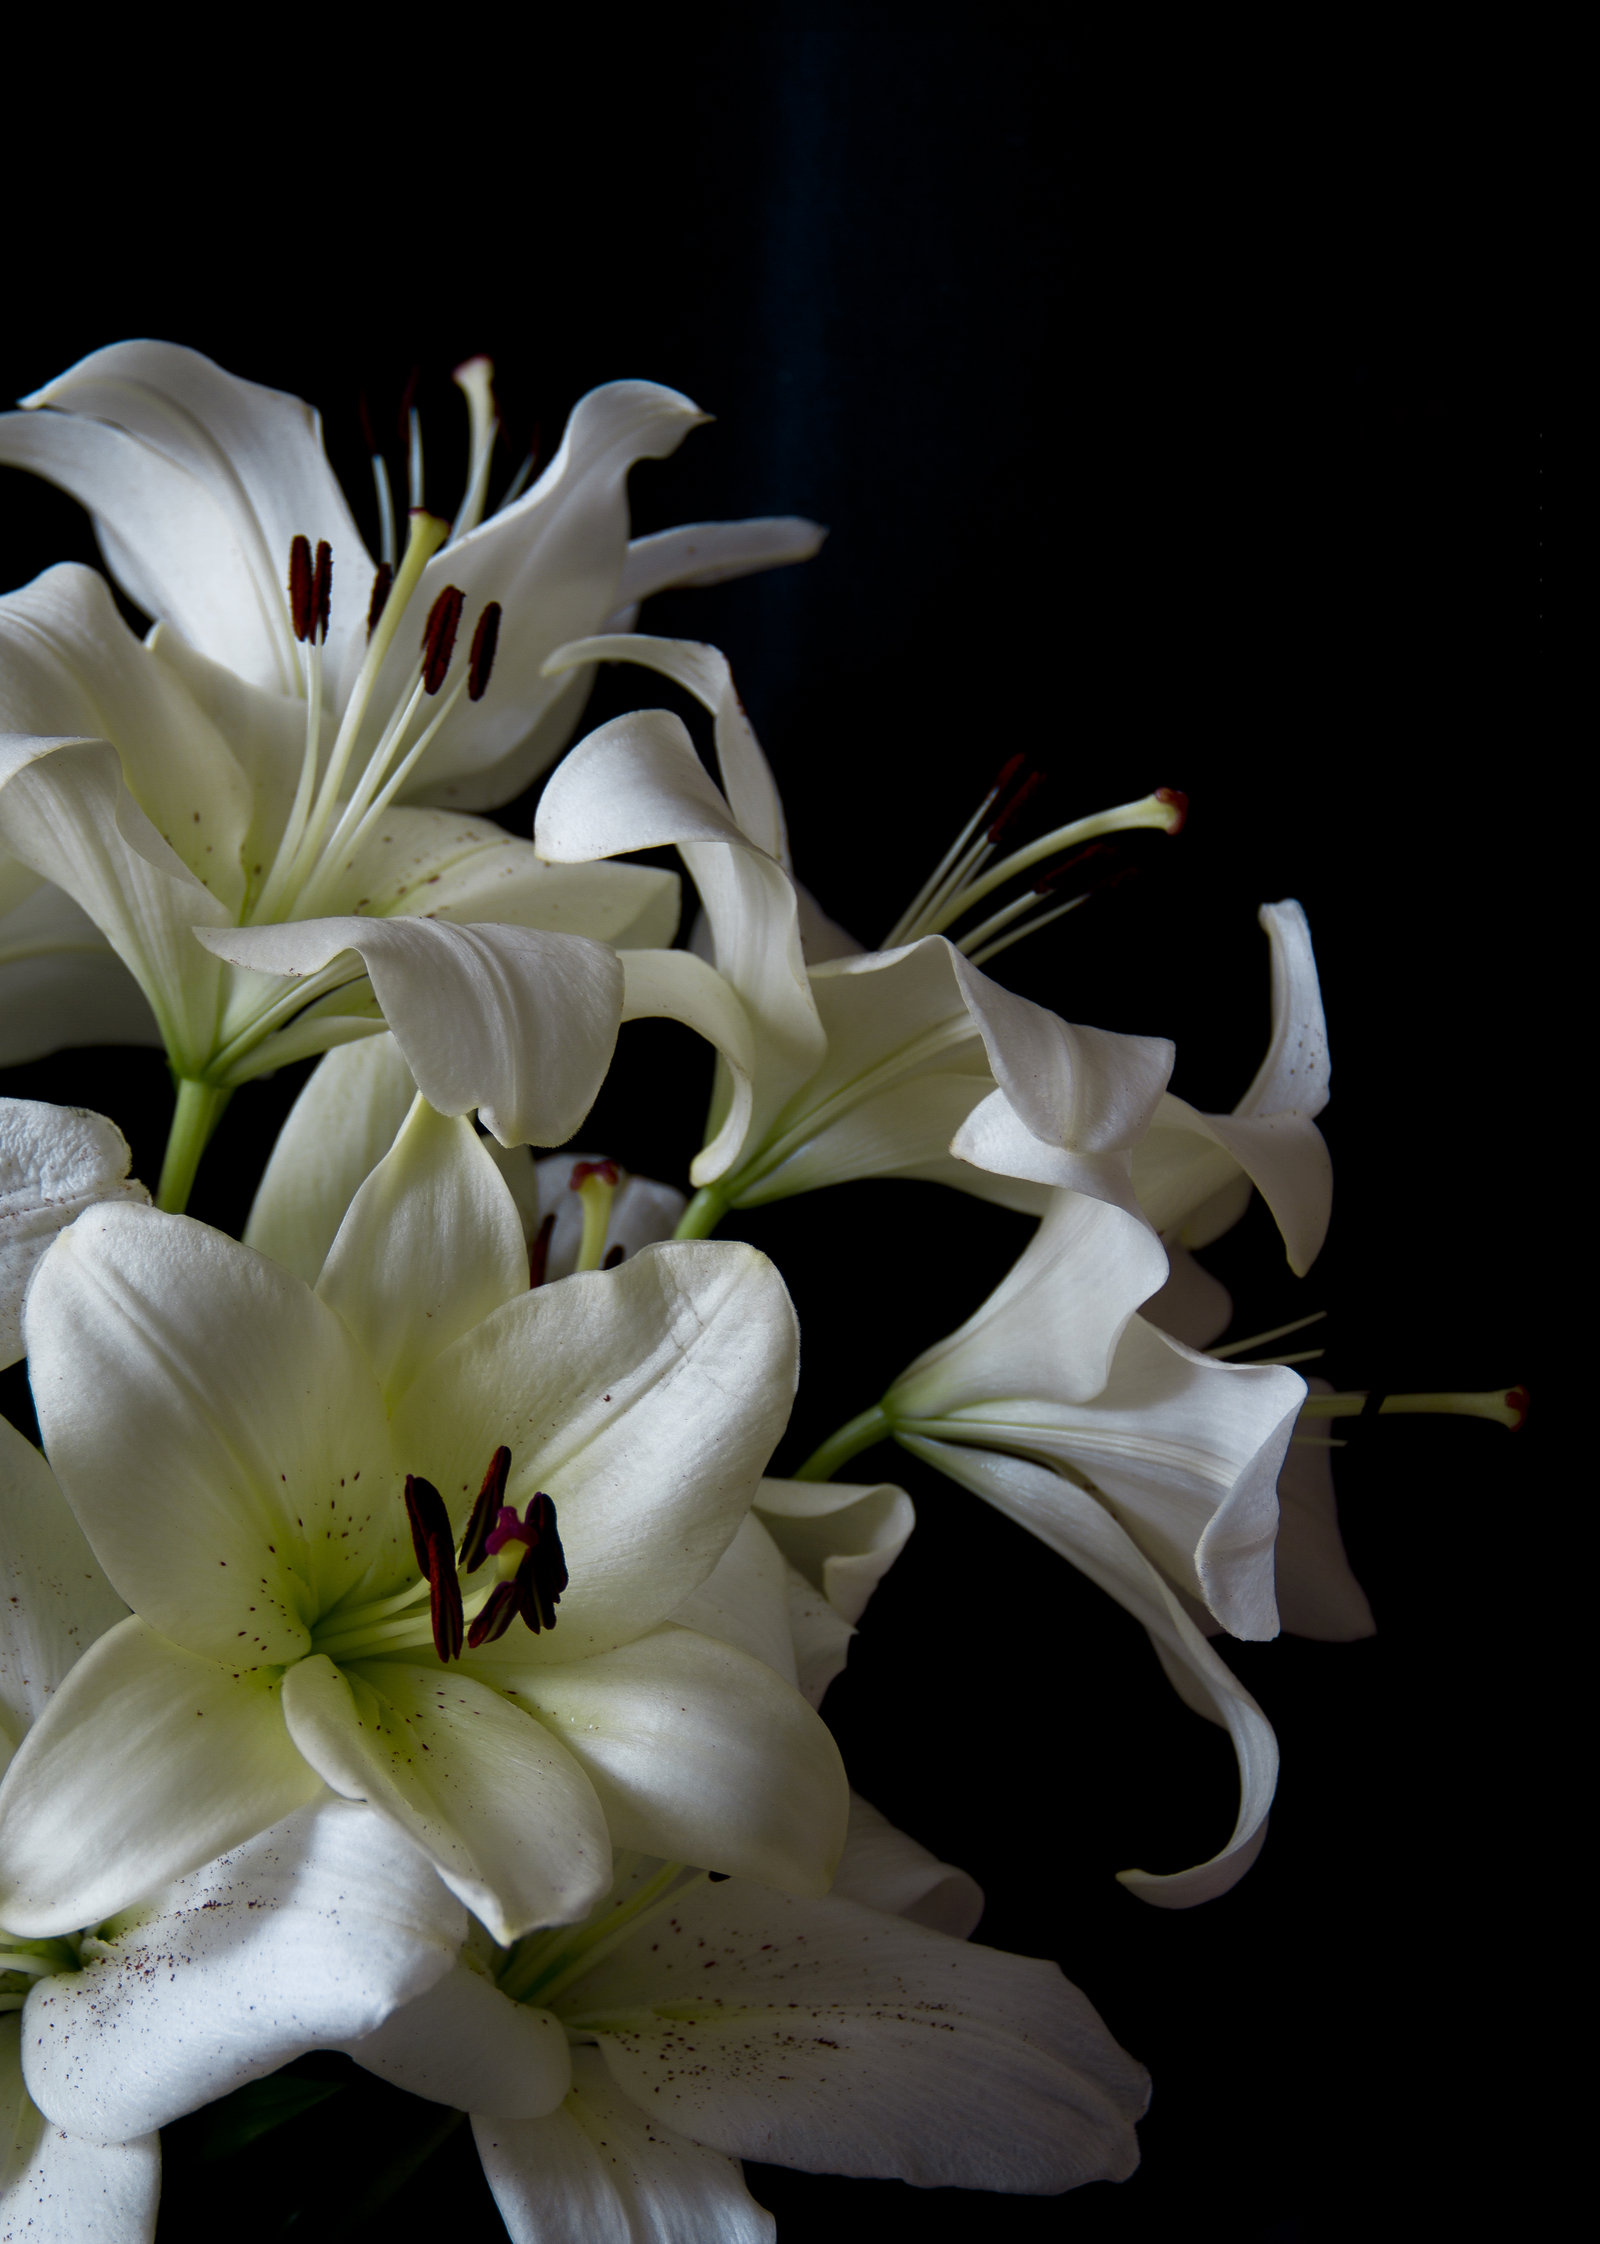 White Lily Stock III by Avestra-Stock on DeviantArt